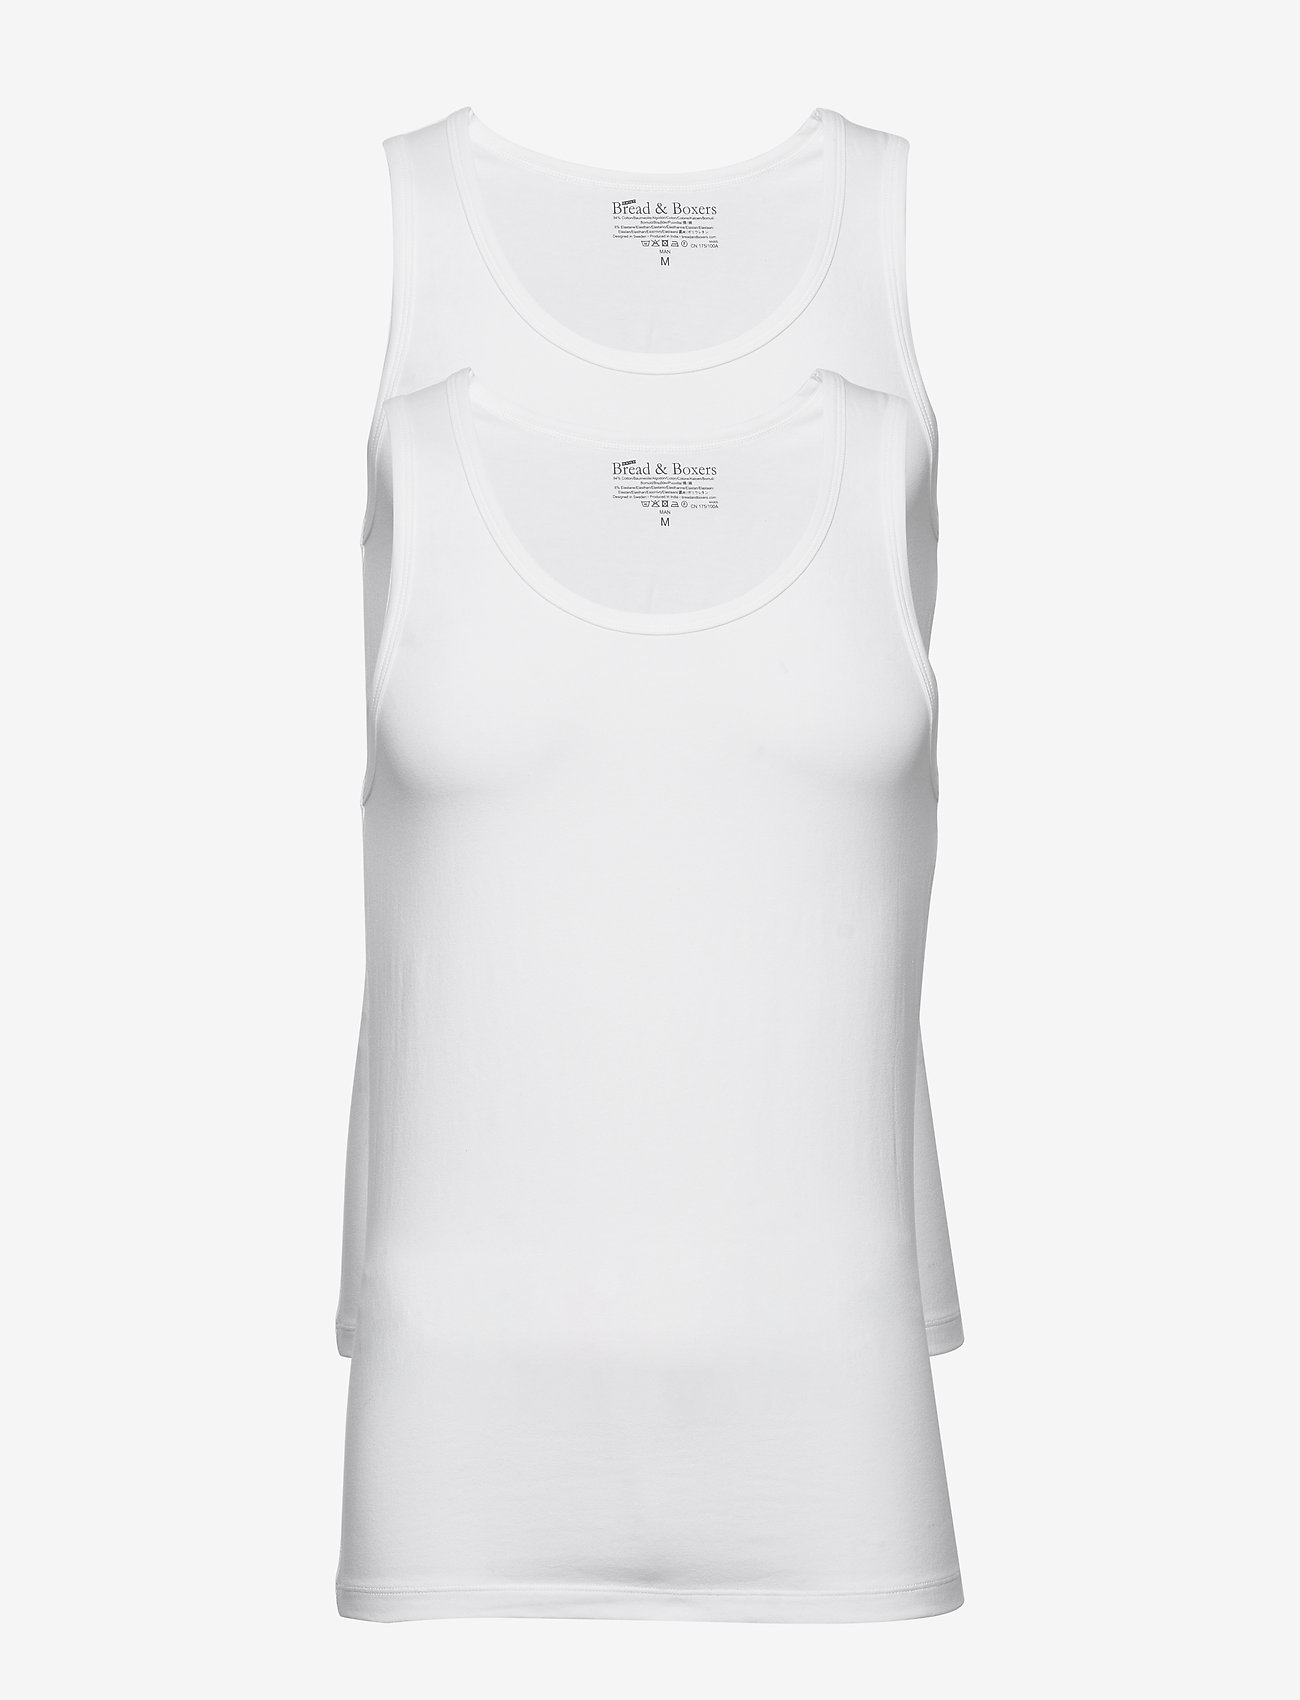 Bread & Boxers - 2-Pack Tank - nordisk style - white - 1